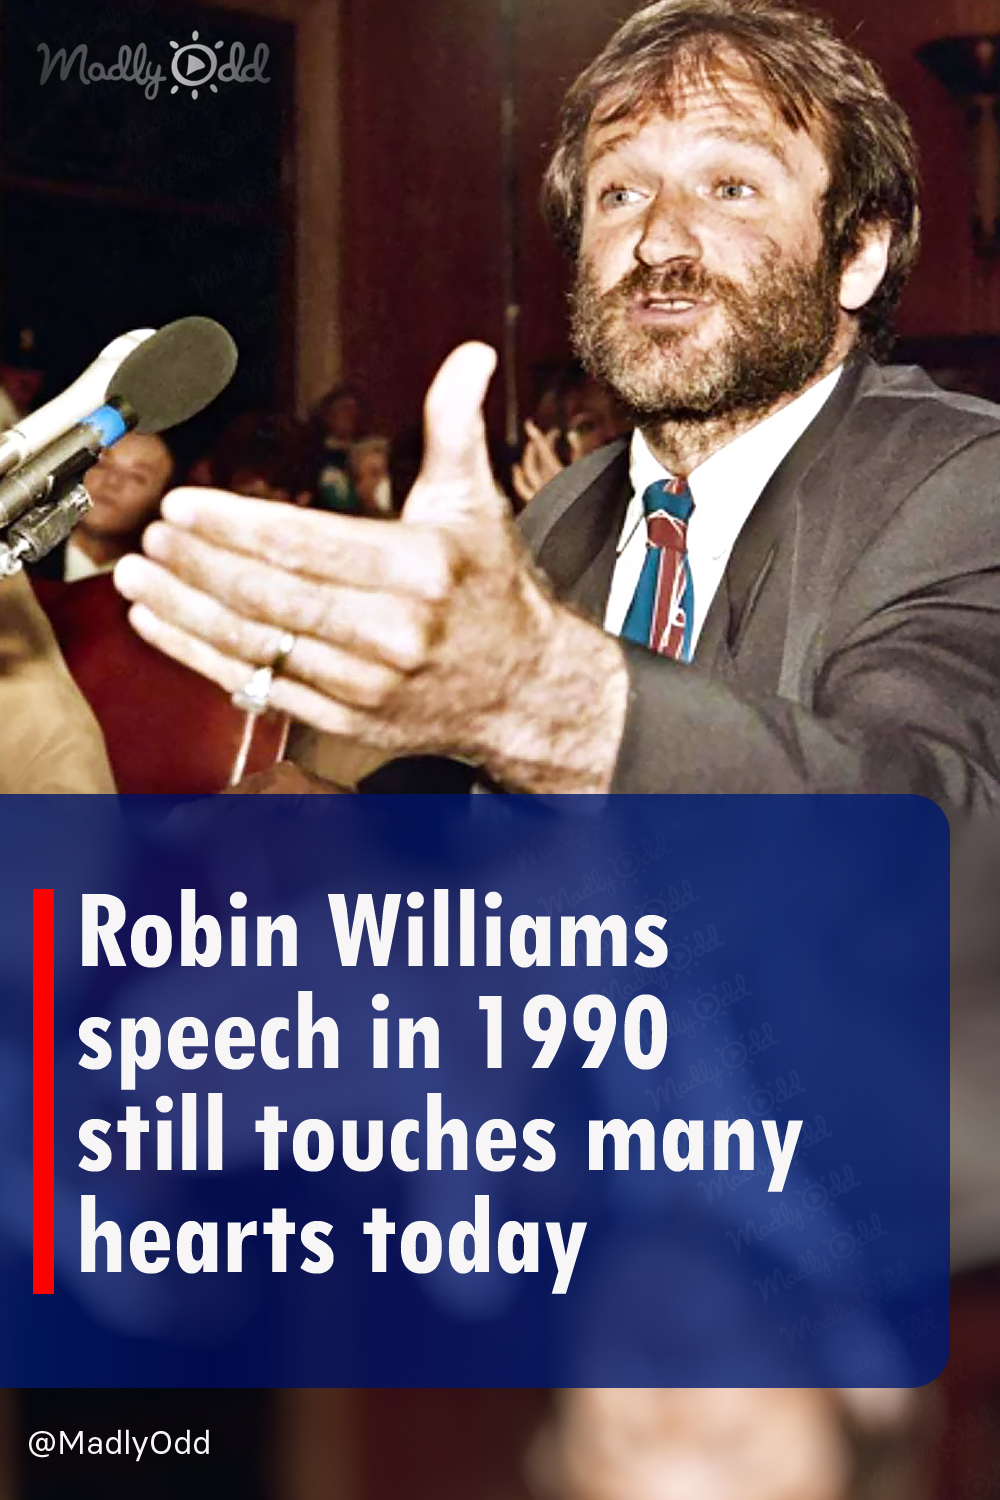 Robin Williams speech in 1990 still touches many hearts today